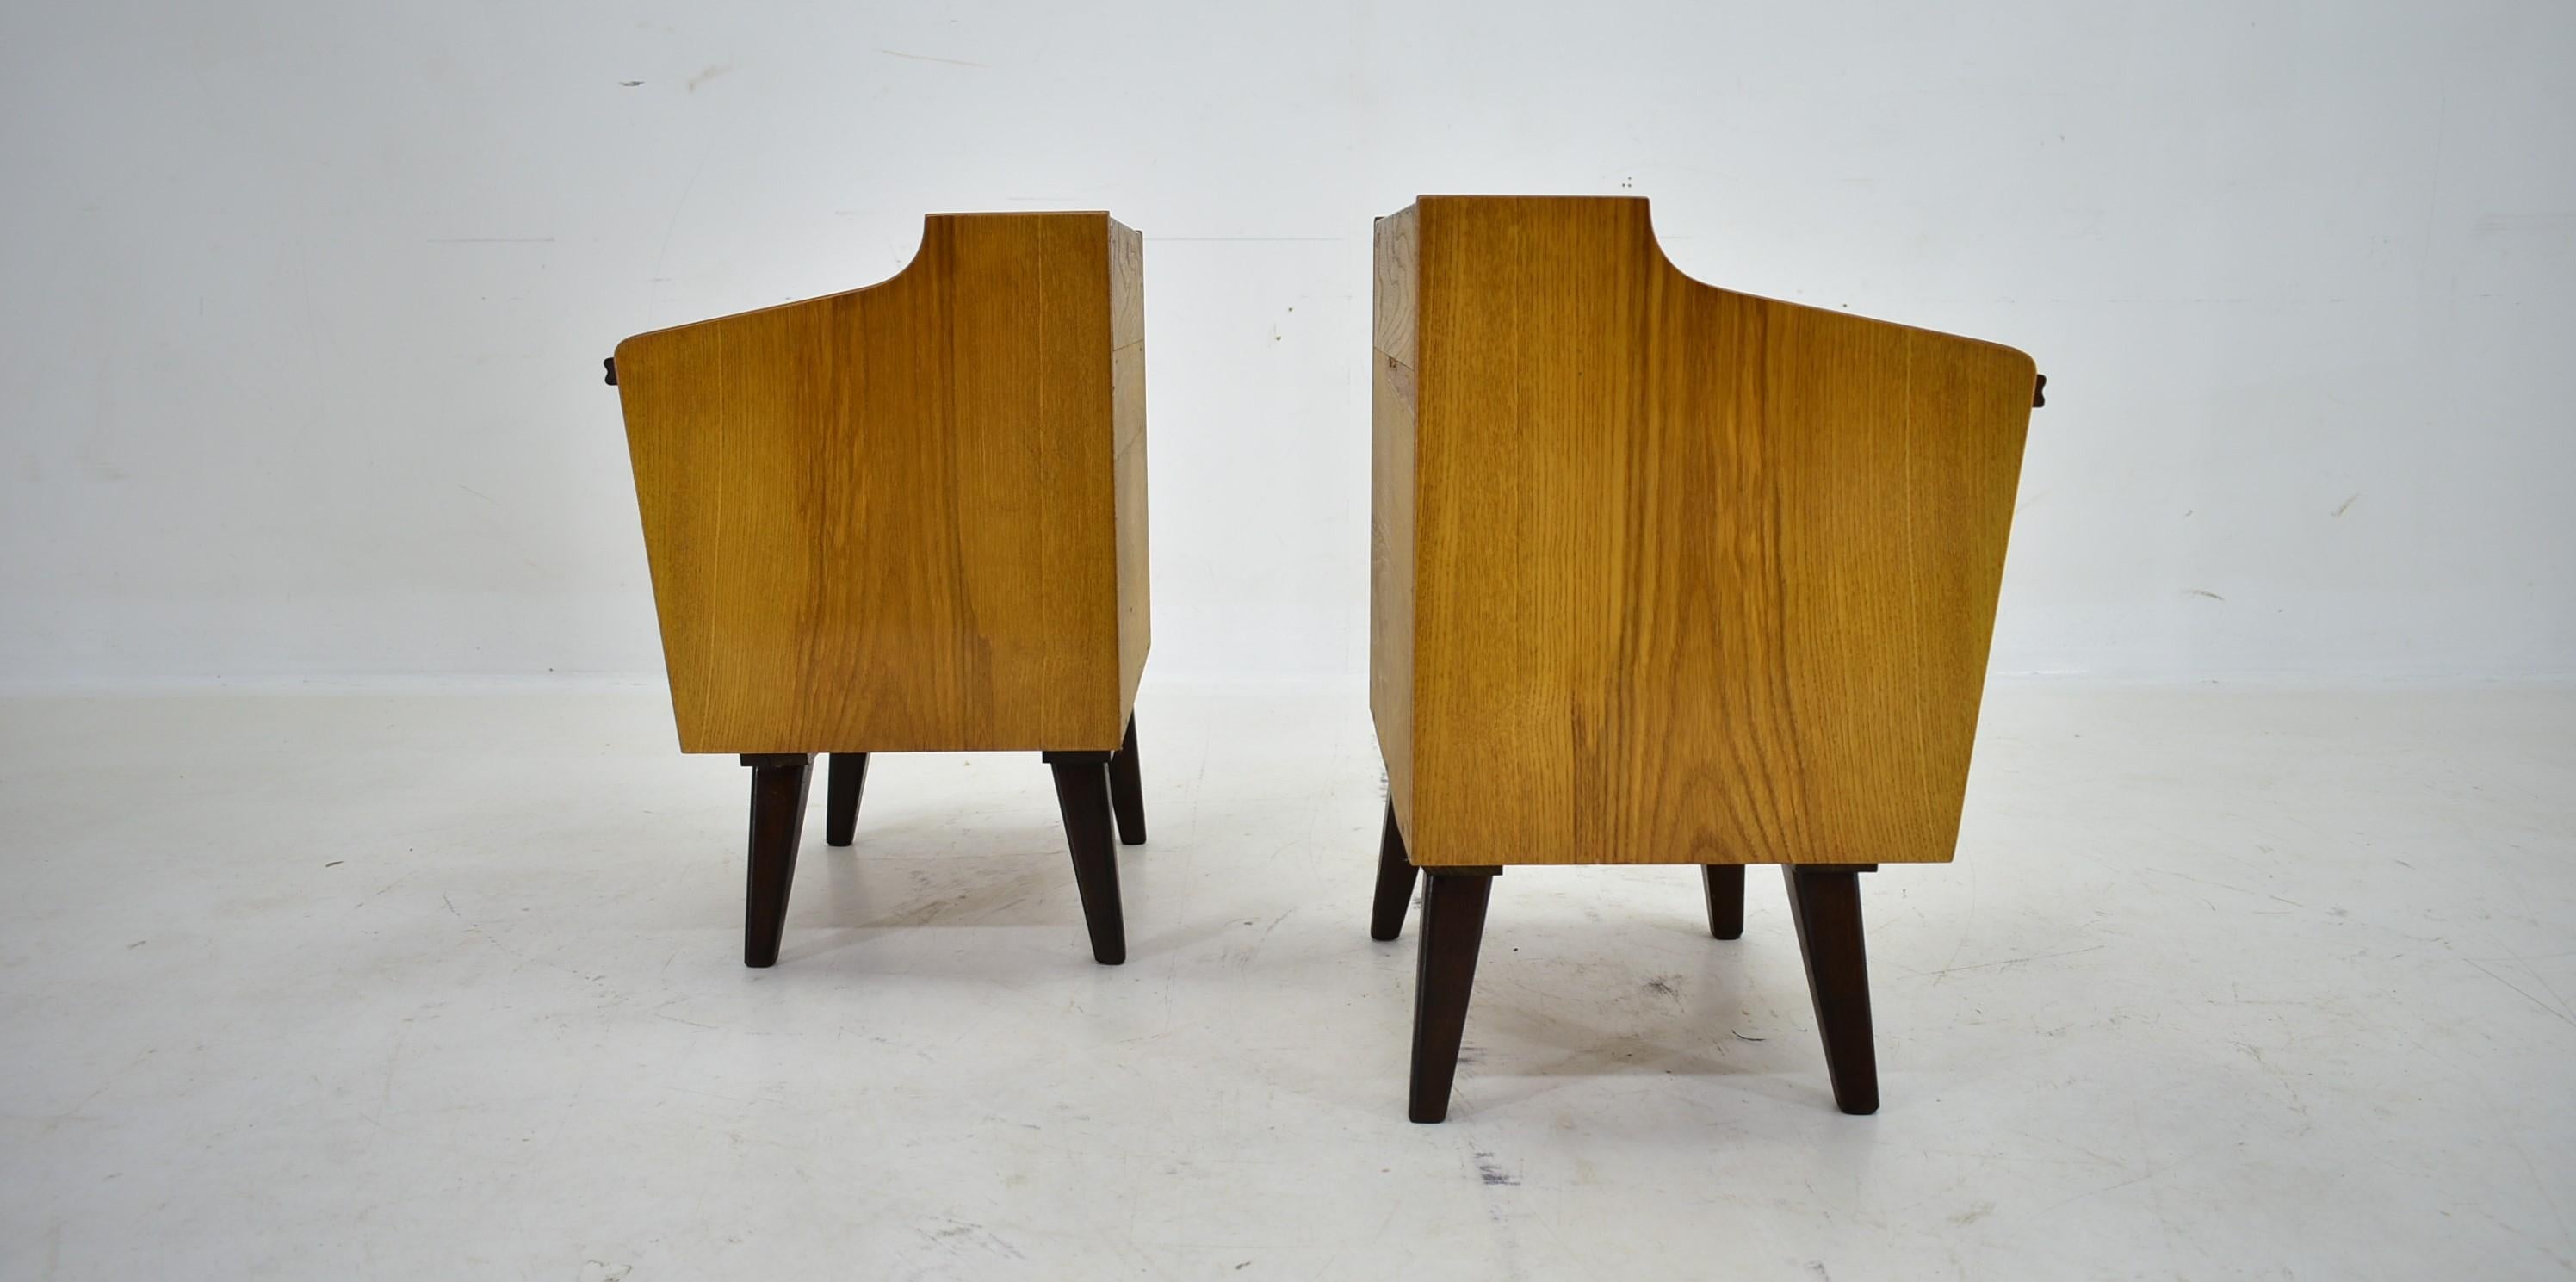 1960s Pair of Midcentury Bedside Tables by Mojmir Požár, Czechoslovakia For Sale 5